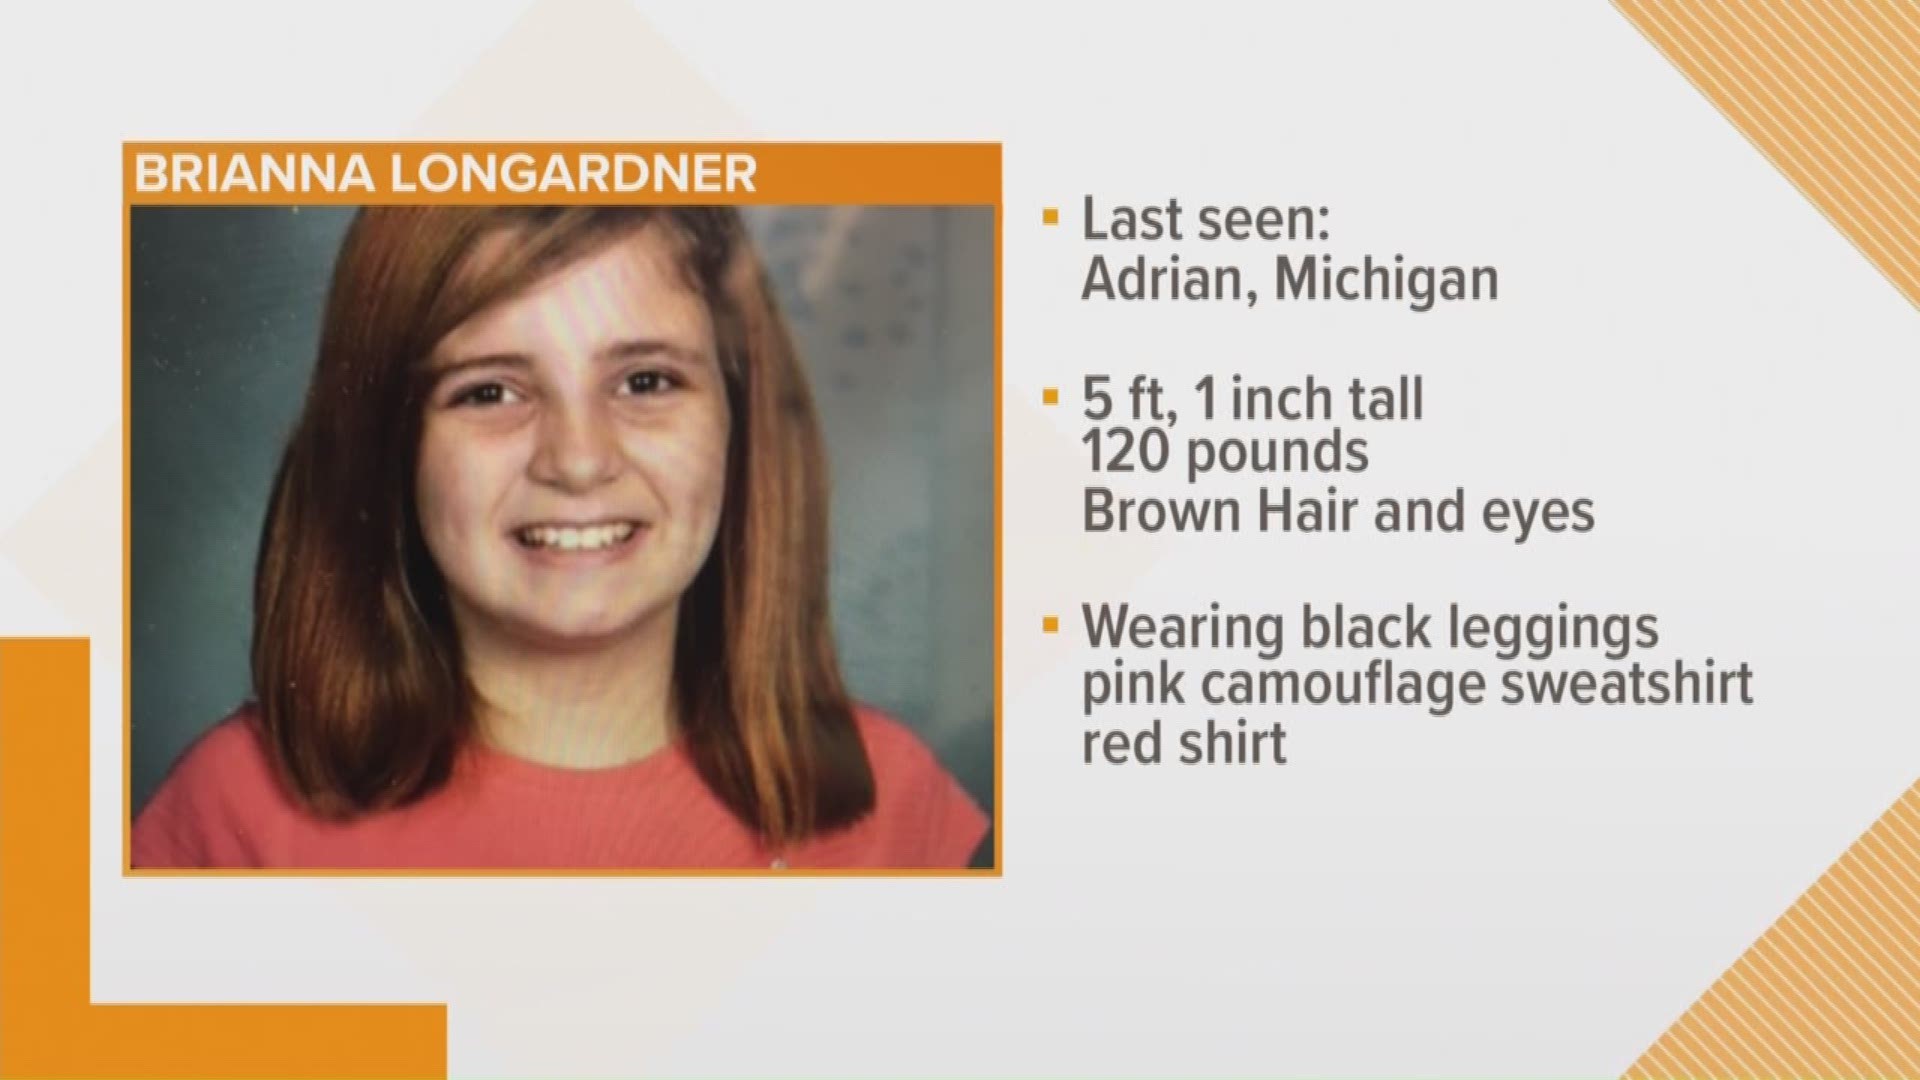 Girl, 12, missing from Adrian, Michigan